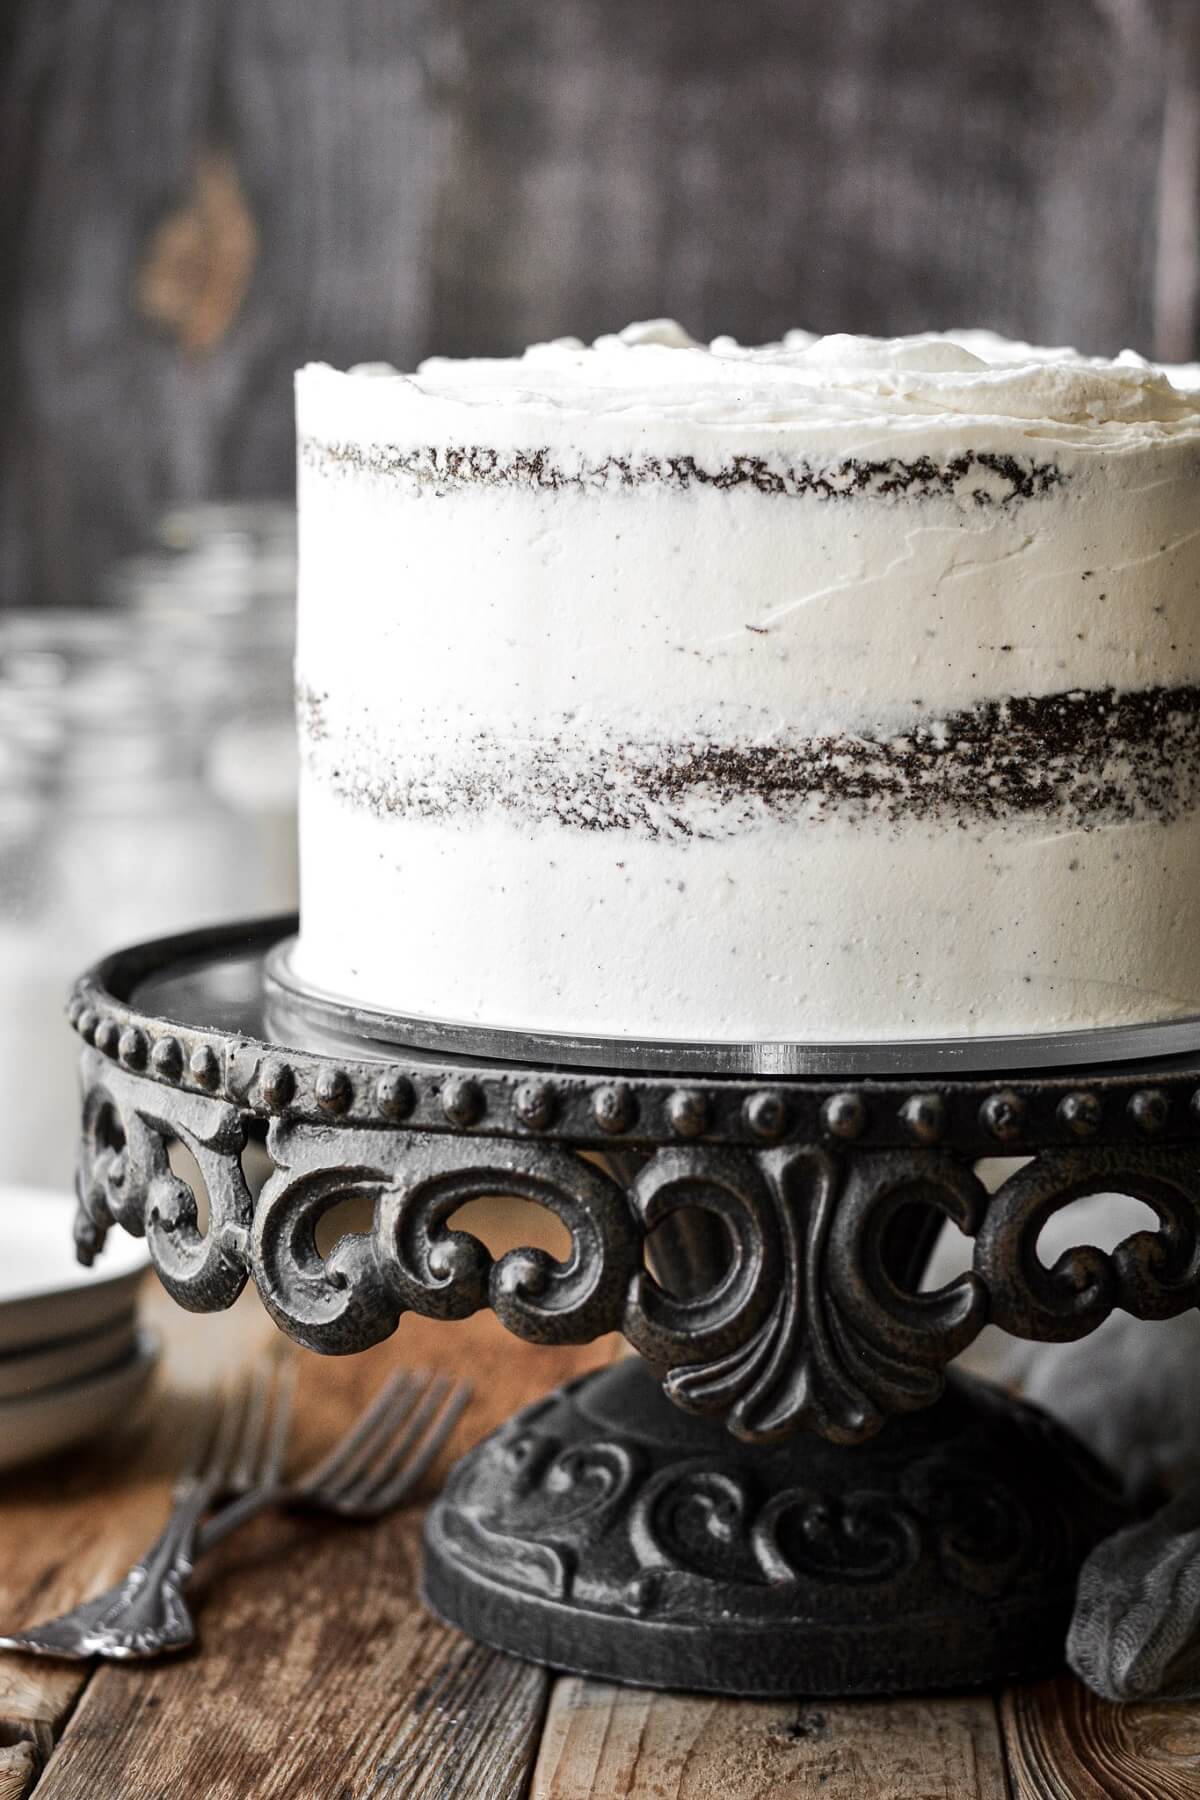 Chocolate mayonnaise cake with vanilla buttercream on a black cake stand.